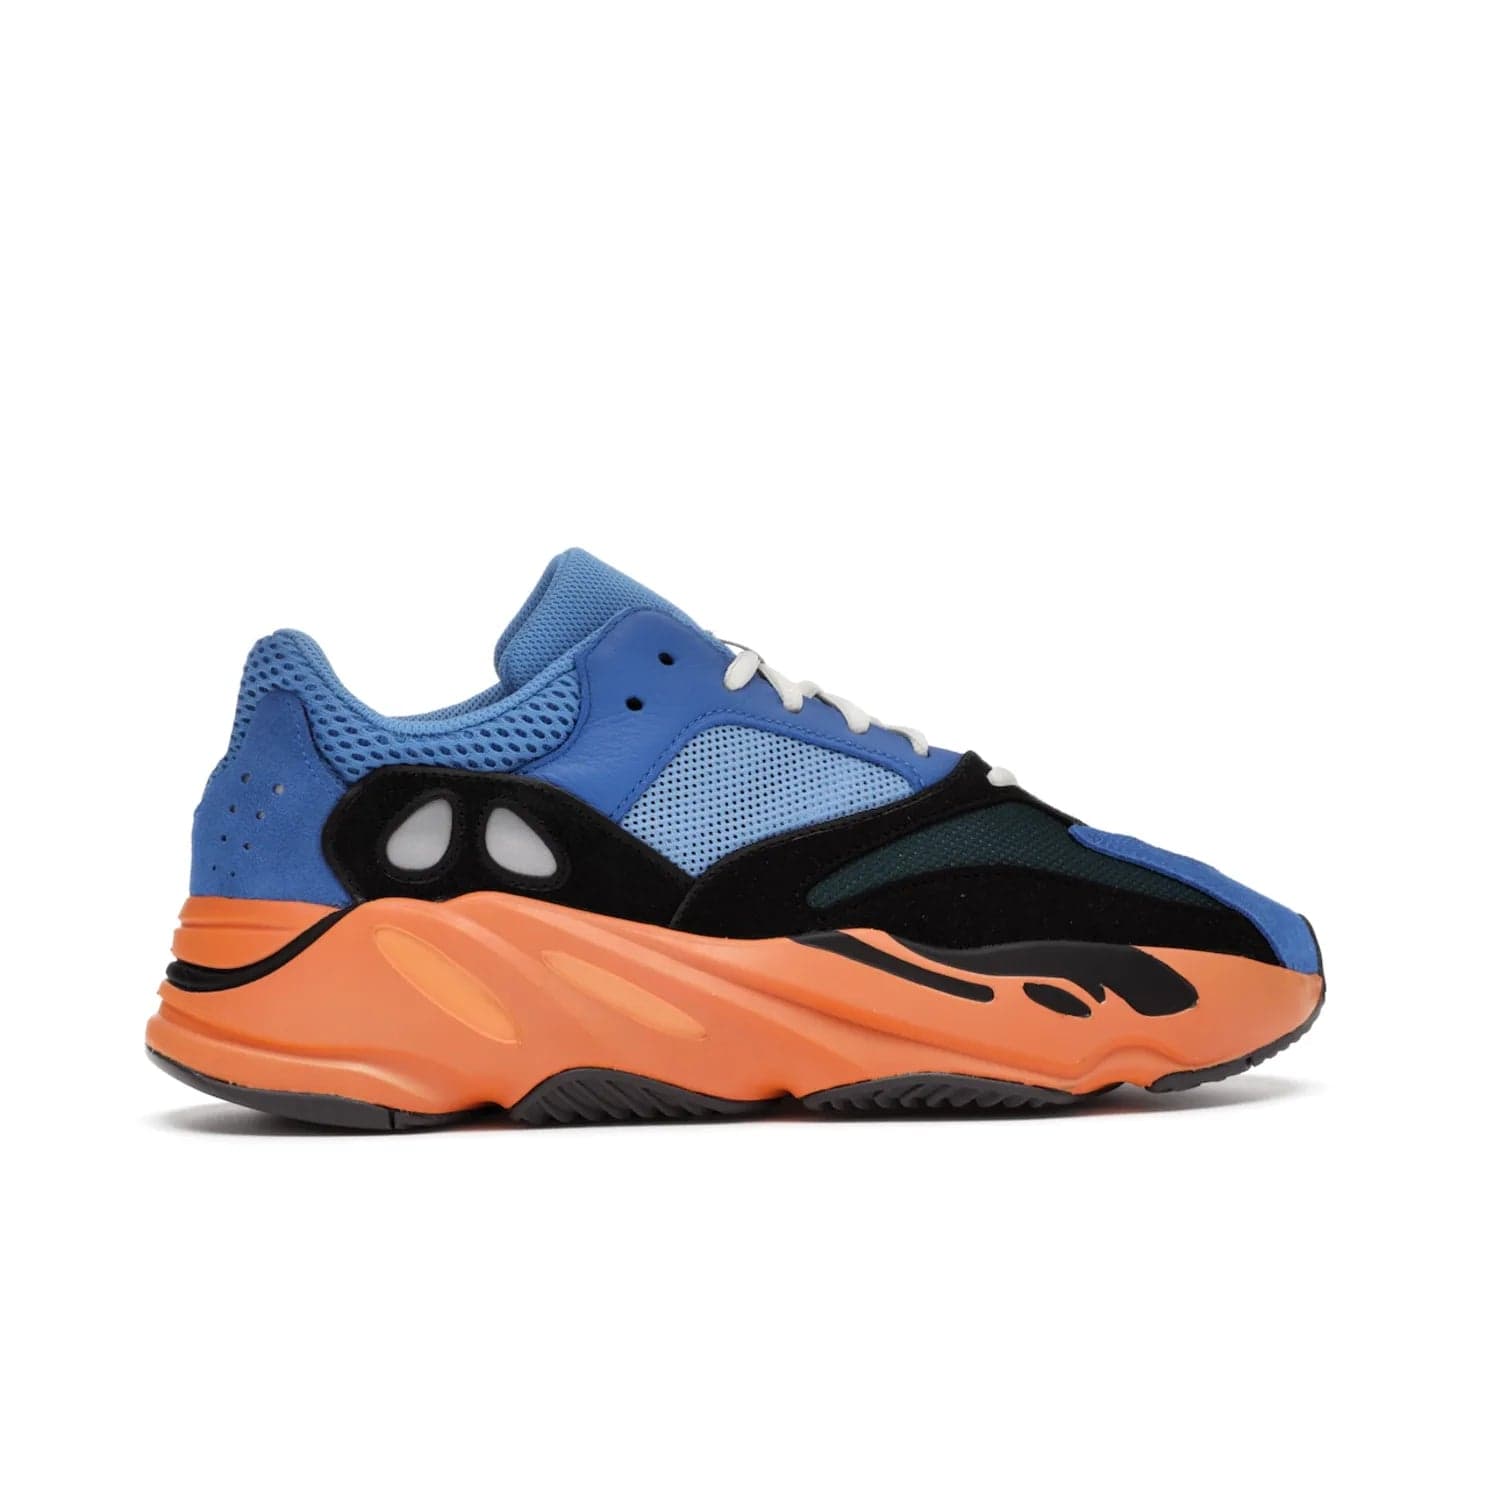 adidas Yeezy Boost 700 Bright Blue - Image 36 - Only at www.BallersClubKickz.com - Iconic sneaker style meets vibrant colour with the adidas Yeezy Boost 700 Bright Blue. Reflective accents, turquoise and teal panels, bright orange midsole and black outsole make for a bold release. April 2021.